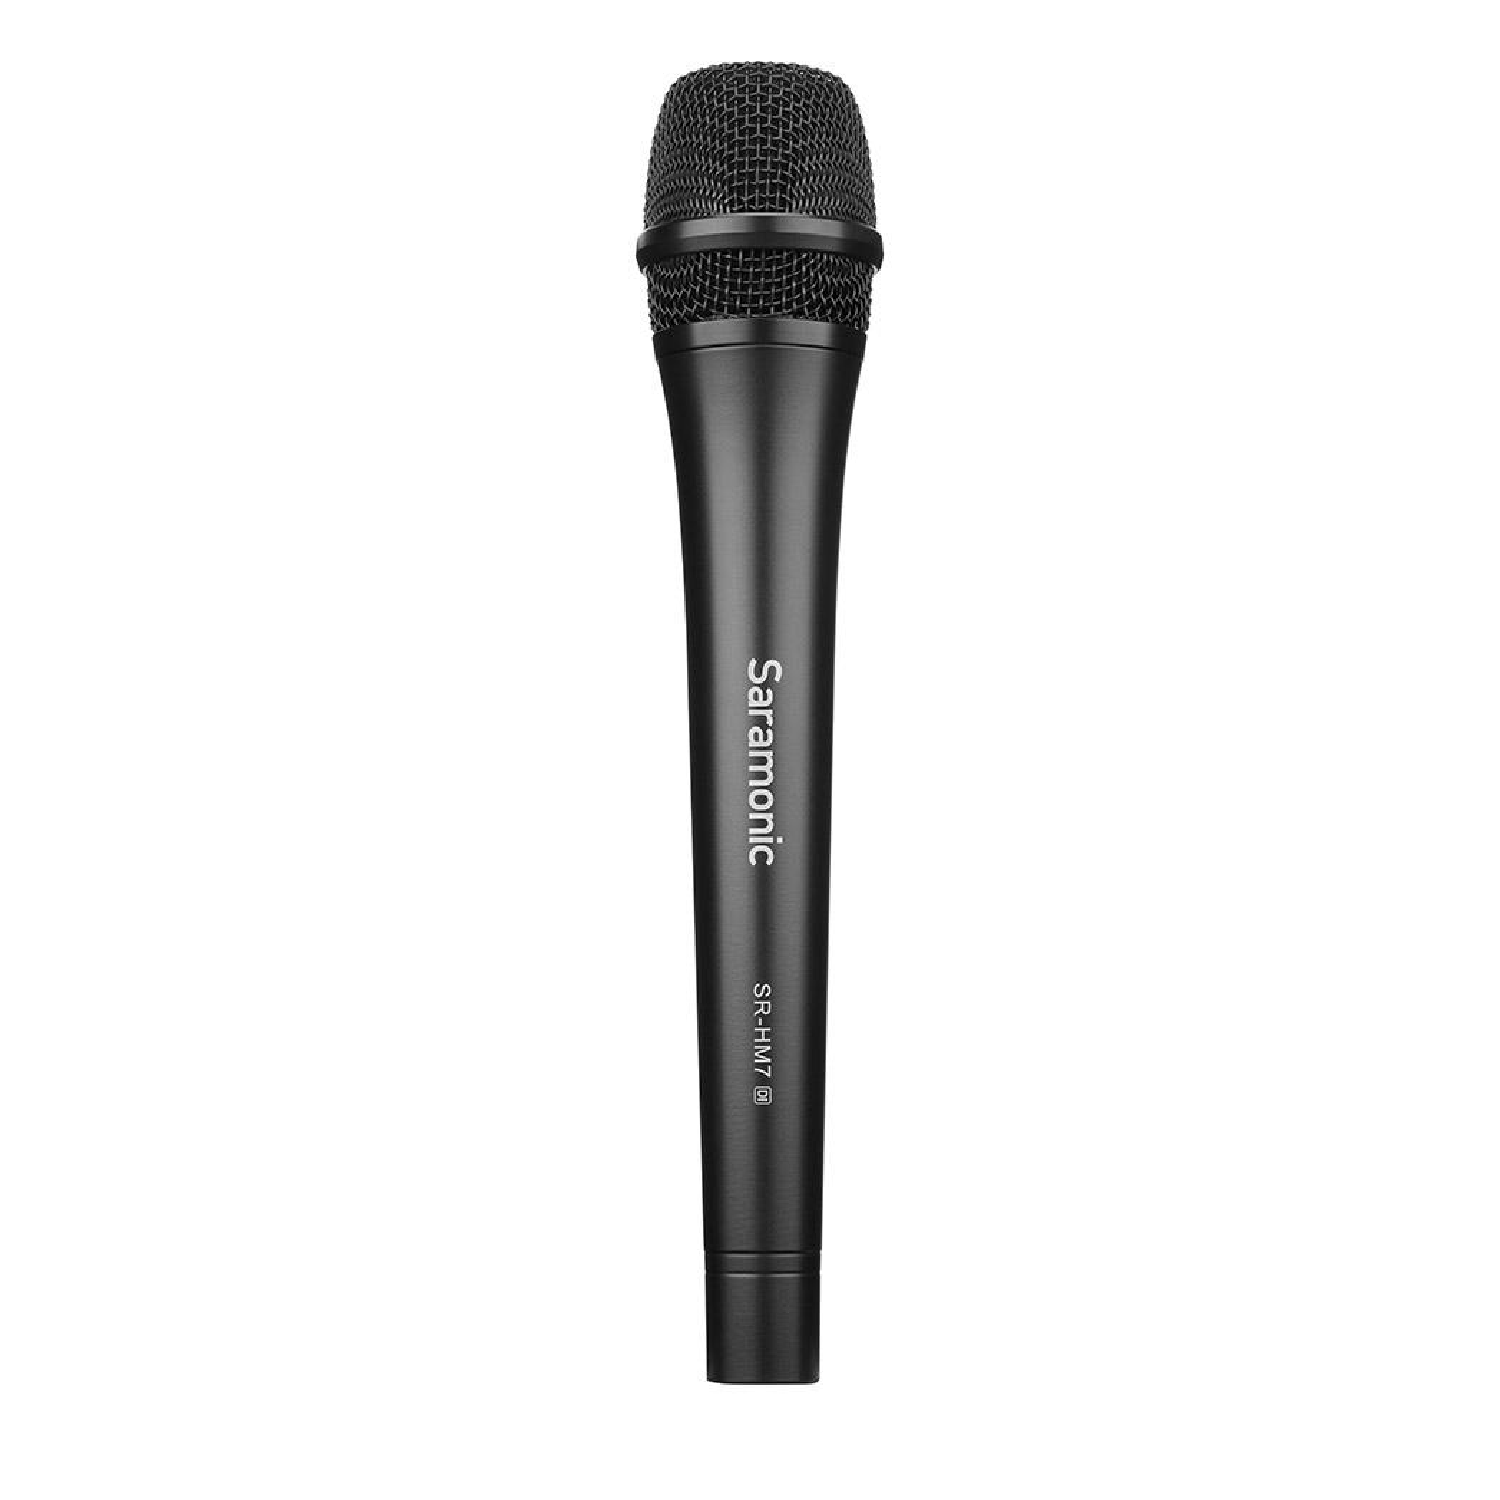 Digital Dynamic Handheld Microphone with Lightning Cable for Apple Iphone, Ipad, USB Cable for Windows PCS and Apple Mac Computer    SRHM7 Di saramonic